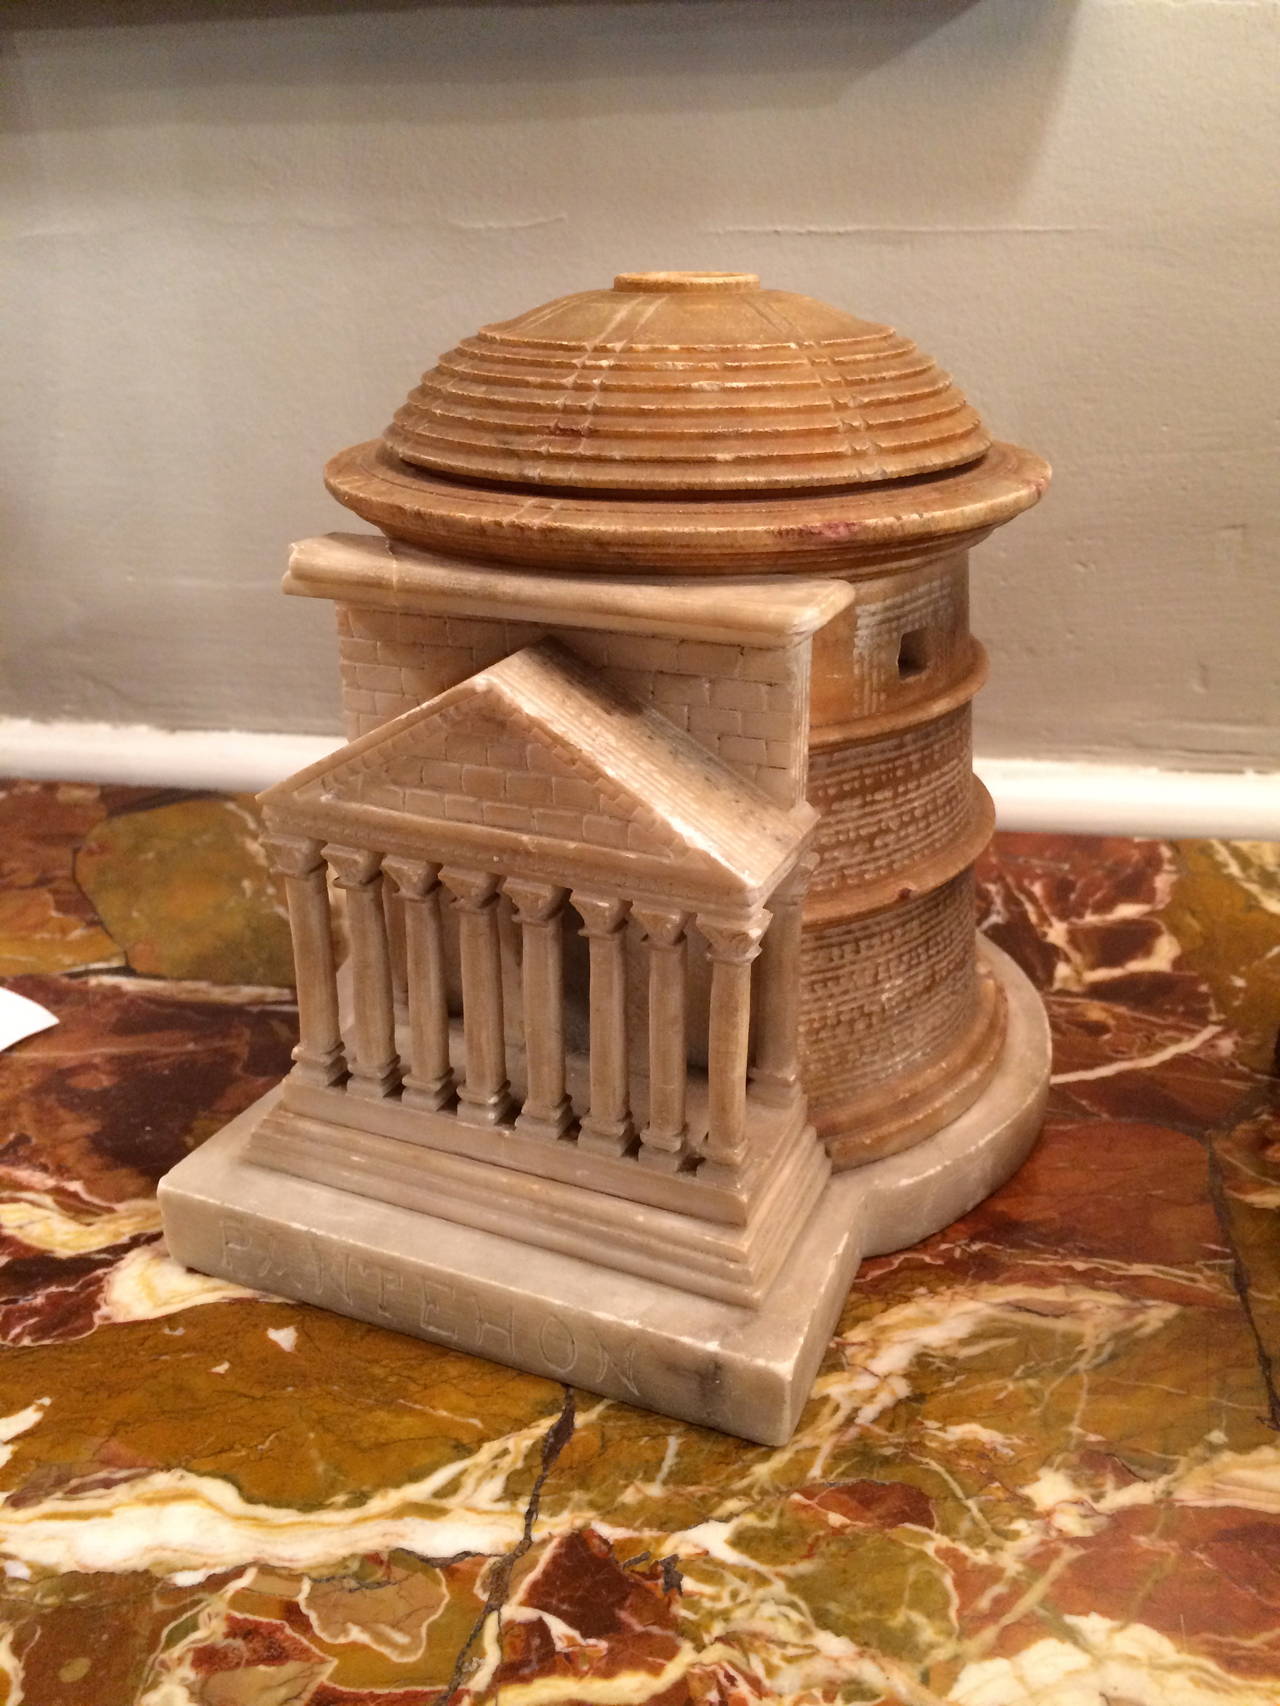 Fine quality Italian Grand Tour model of the Pantheon in Rome carved from brown and white alabaster. A charming architectural model of the famous landmark which was a major attraction to those making the 'Grand Tour' of Italy's ancient sites.